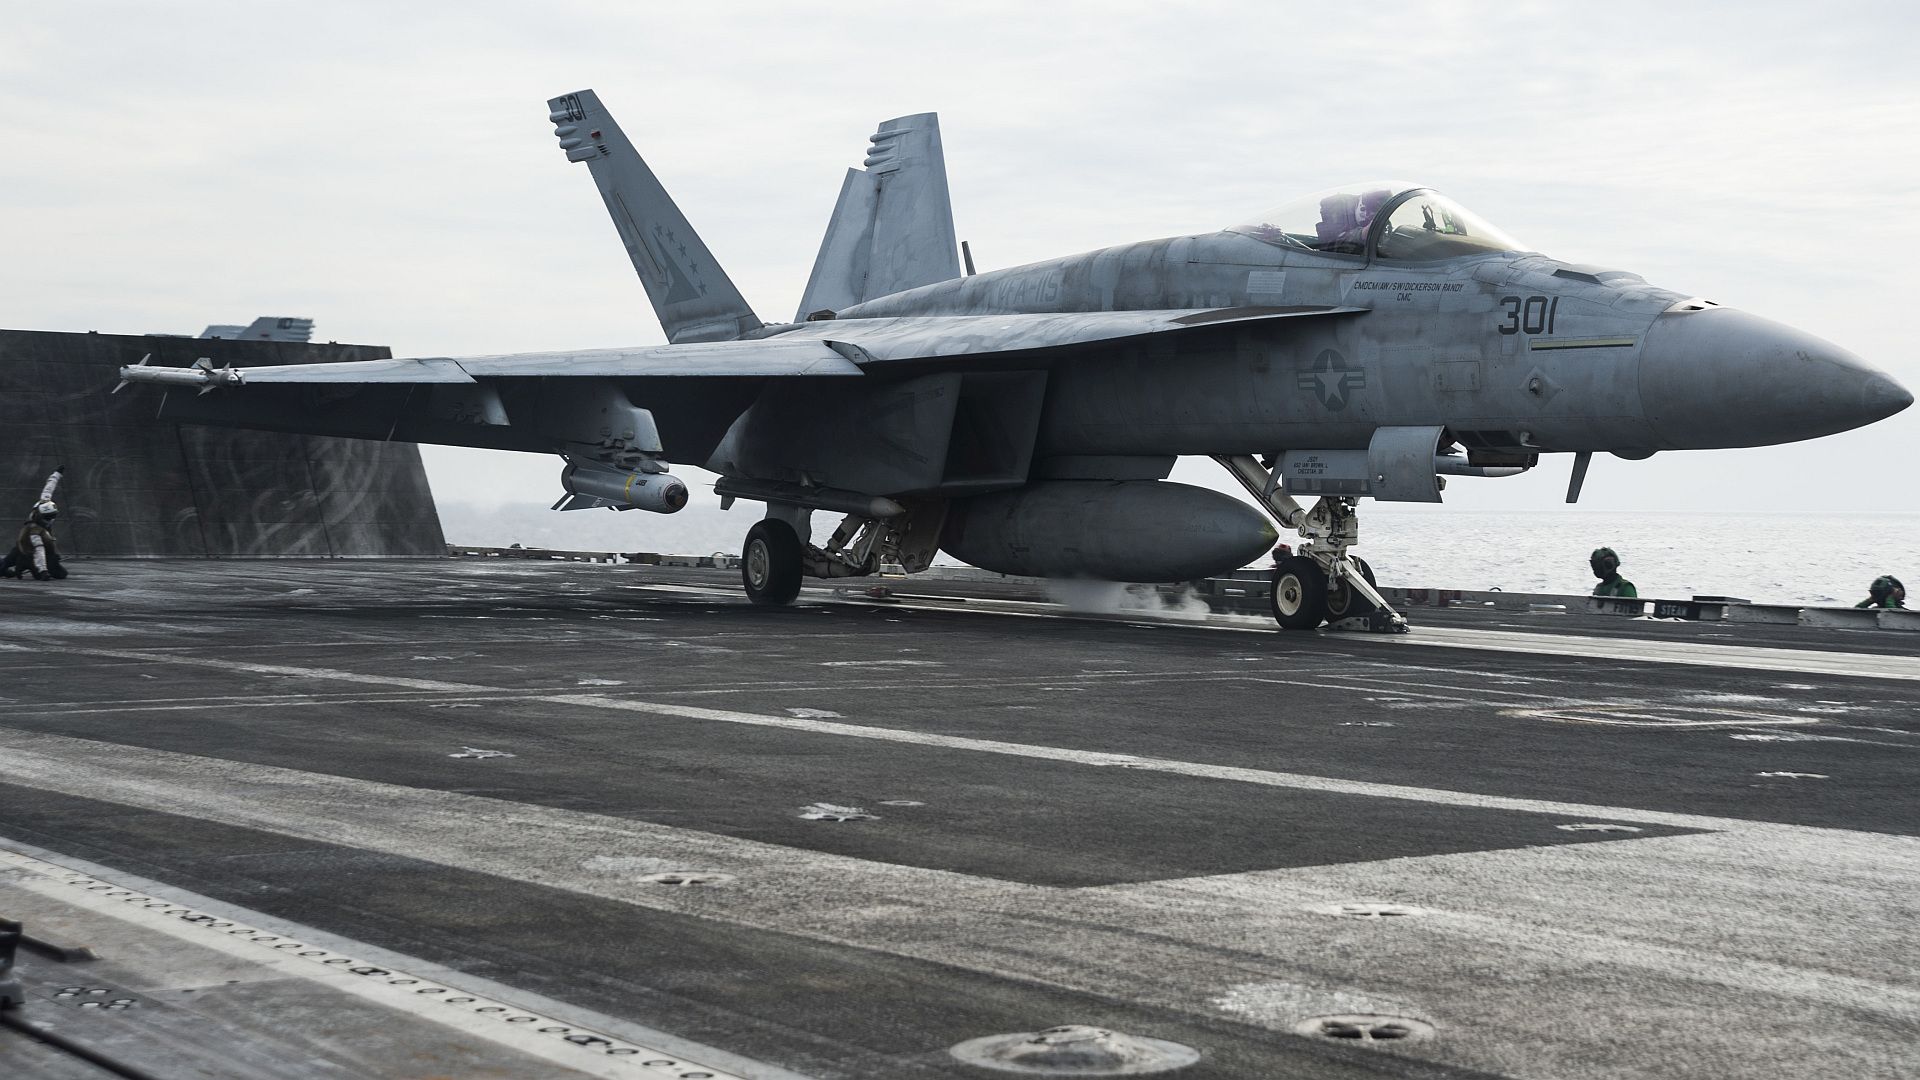 FA 18E Assigned To The Eagles Of Strike Fighter Squadron VFA 115 Launches Off The Flight Deck Of The Aircraft Carrier USS Ronald Reagan